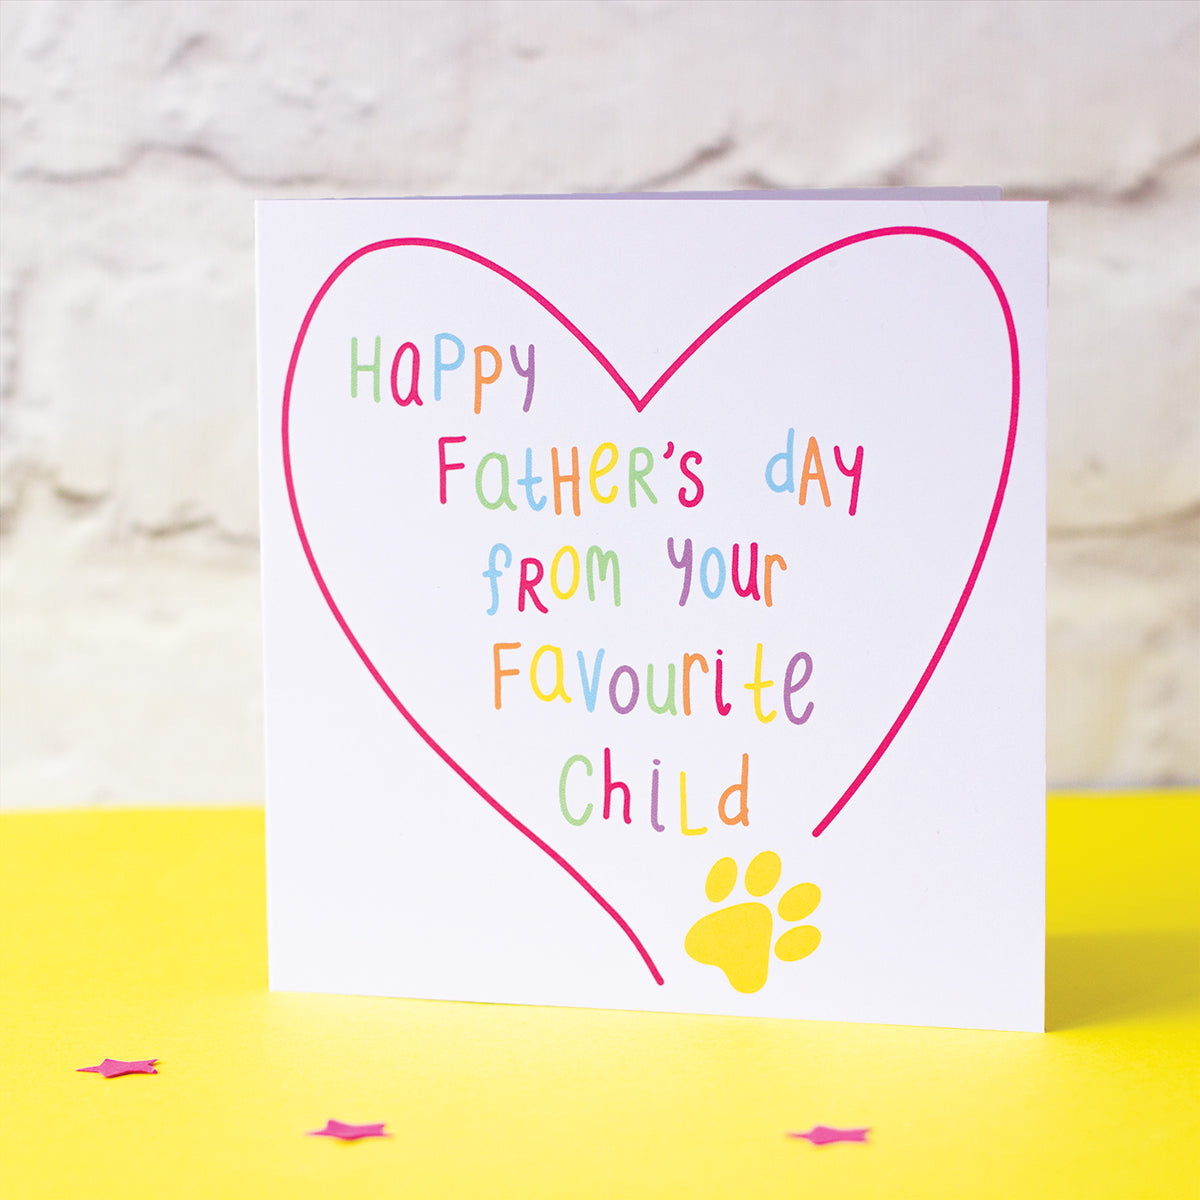 Happy Father's Day from Your Favourite Child with a paw print and a heart drawn around. text is in various colours and illustrated to look like the writing is by the dog or cat so it's fun and colourful.